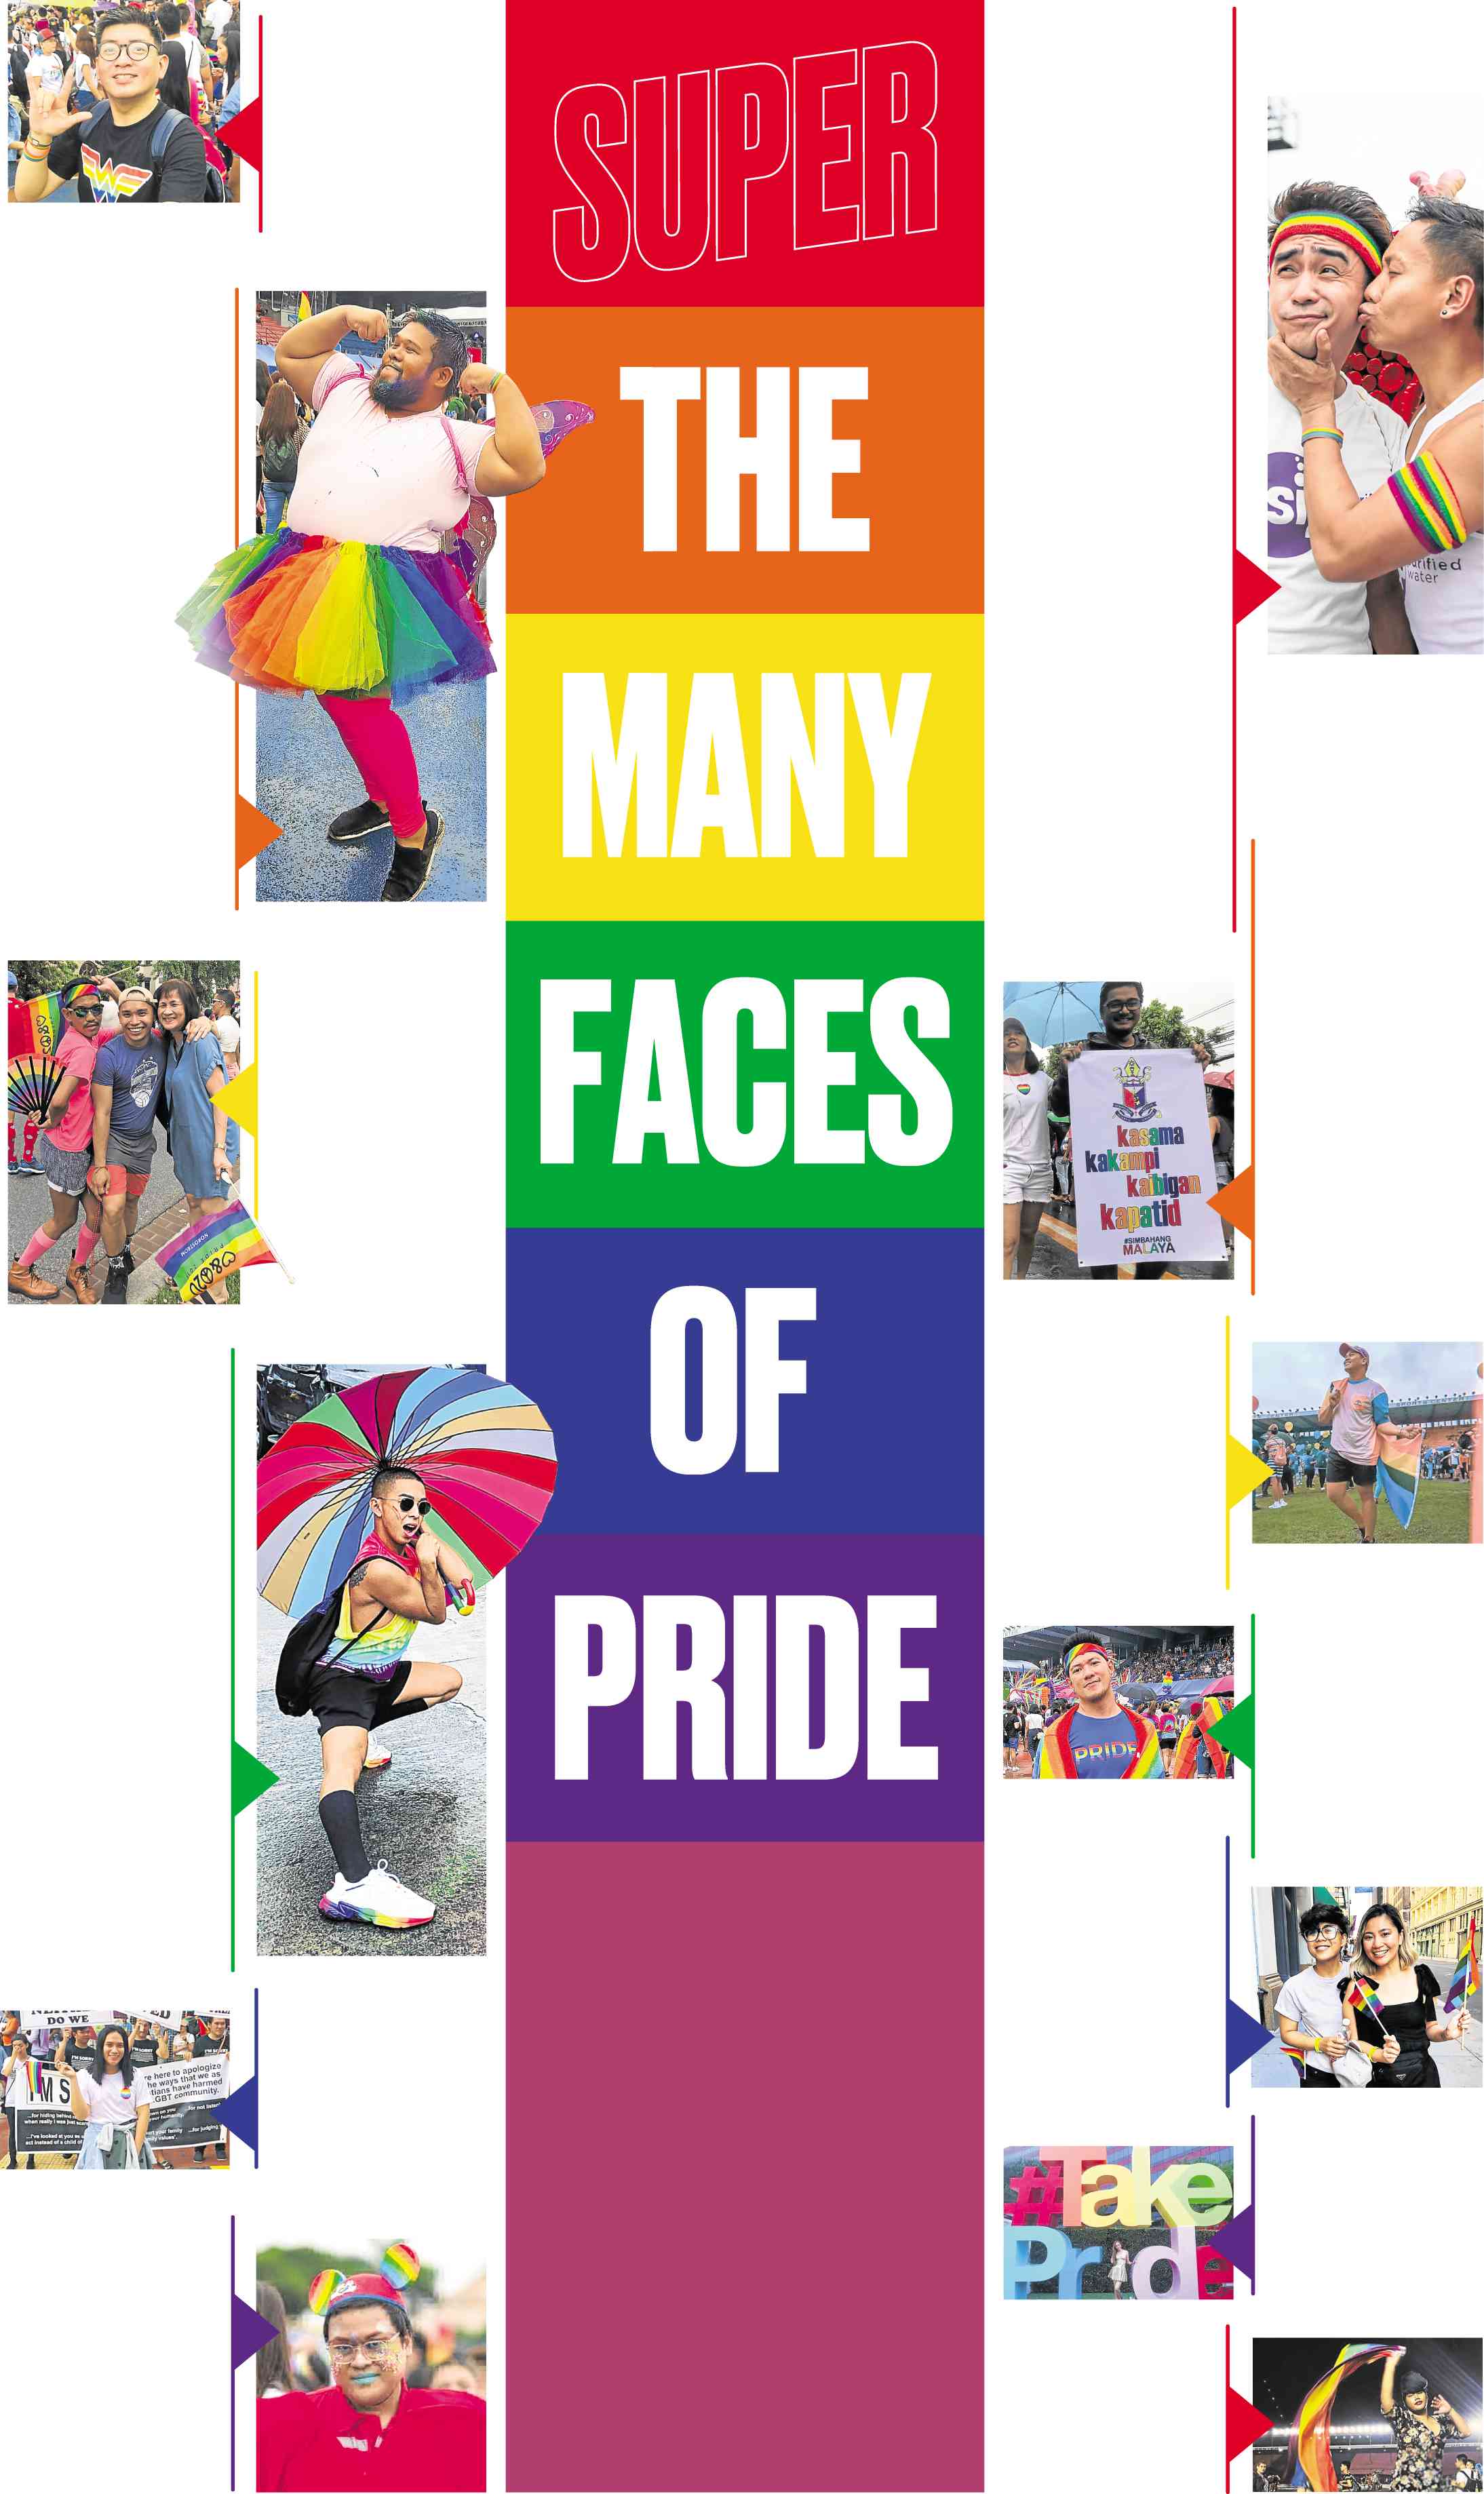 The many faces of Pride